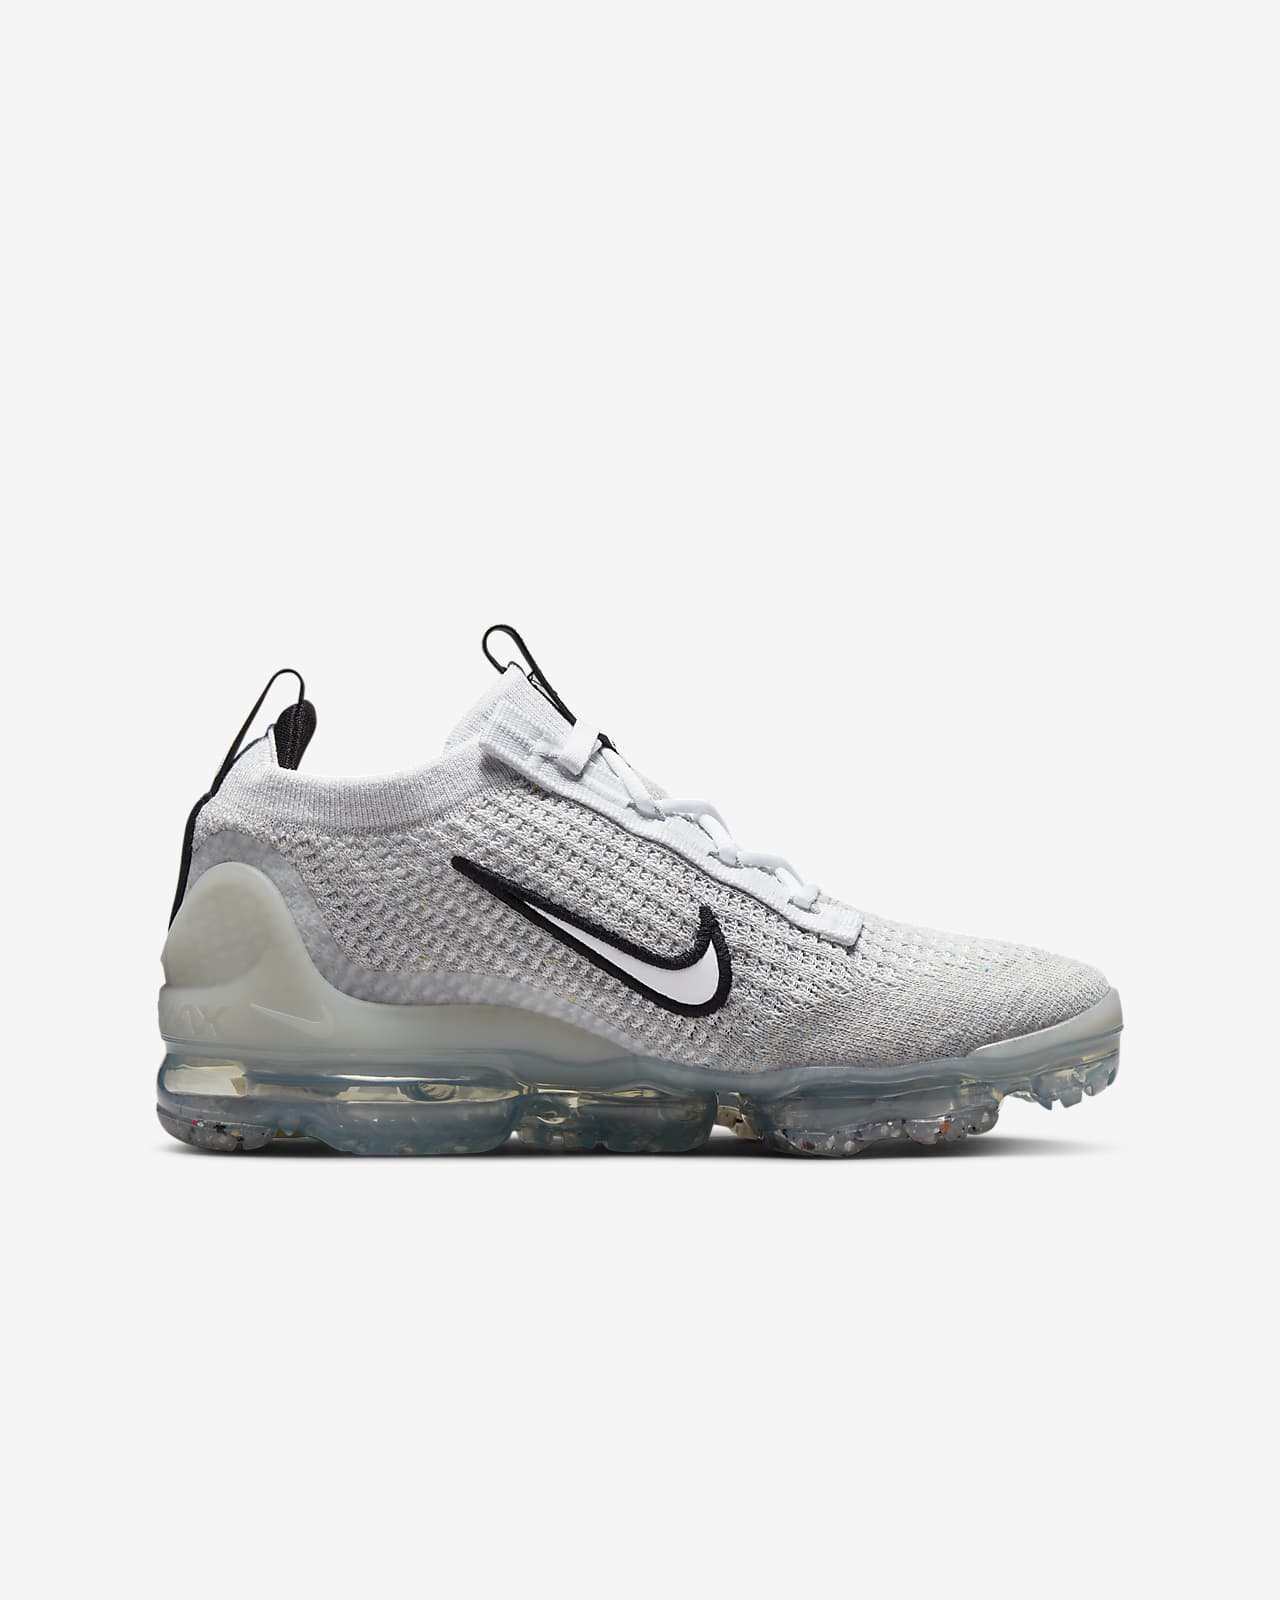 vapormax youth size